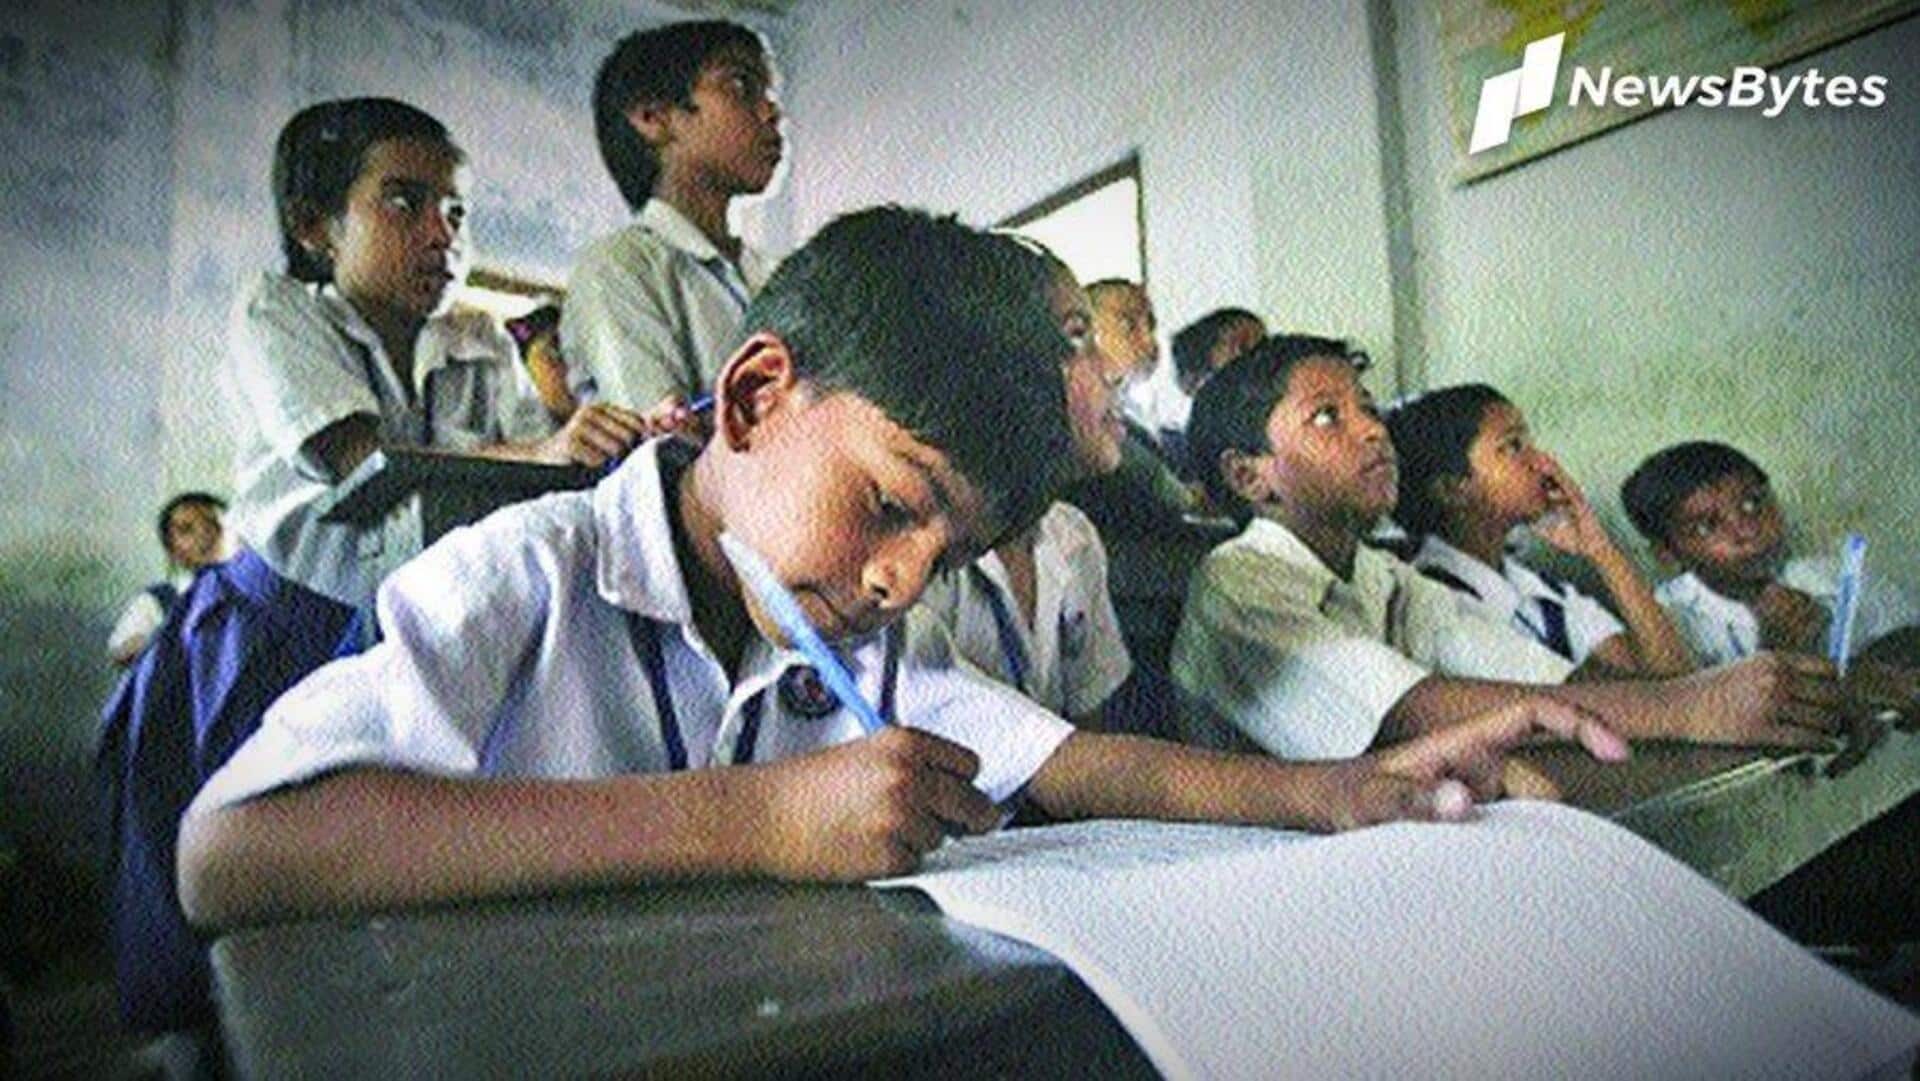 Coaching centres barred from entering students below 16 years